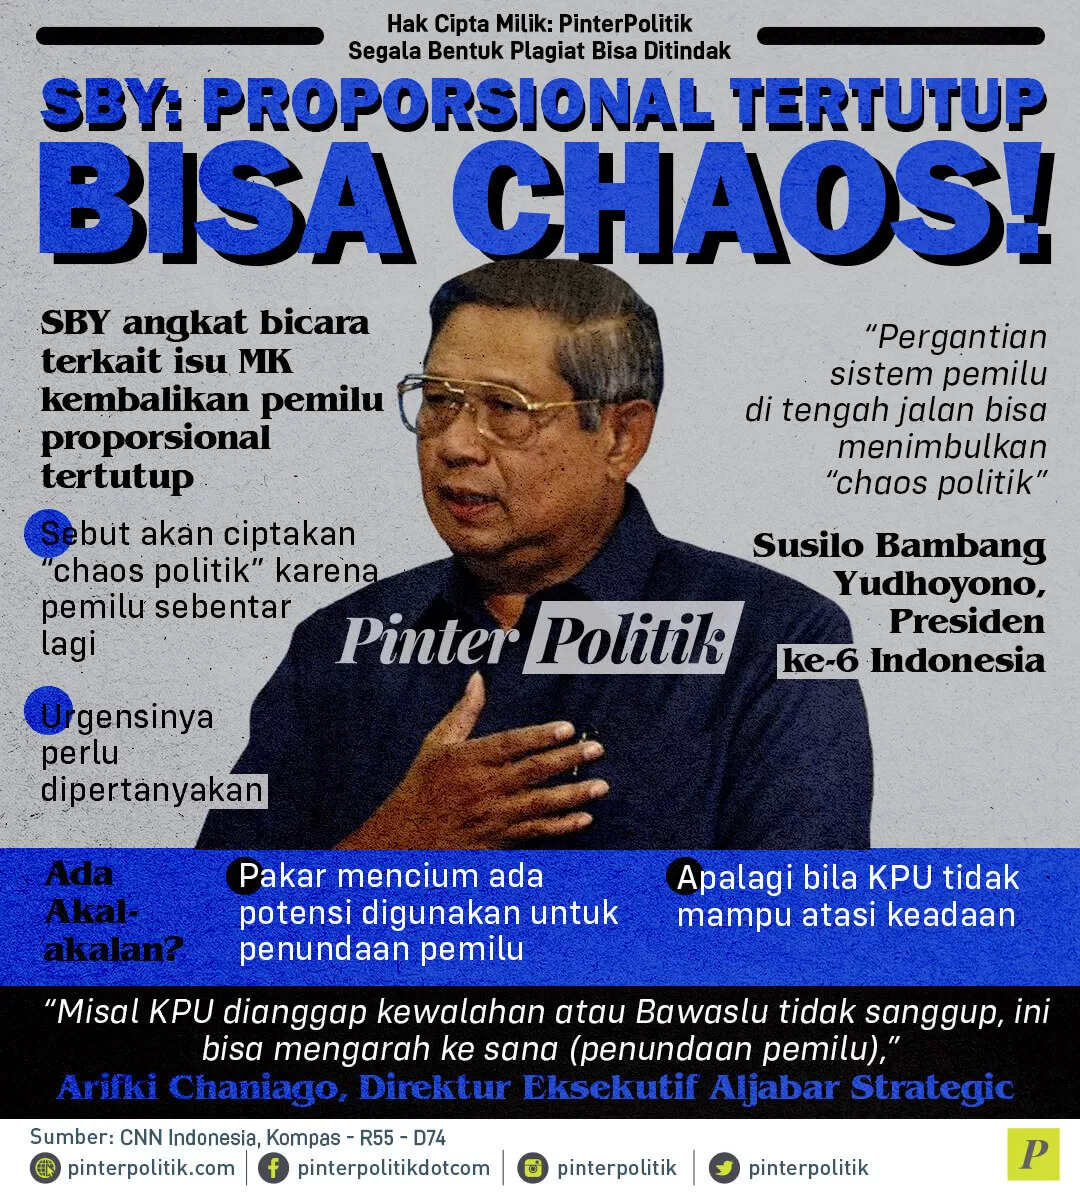 infografis sby proporsional tertutup bisa chaos